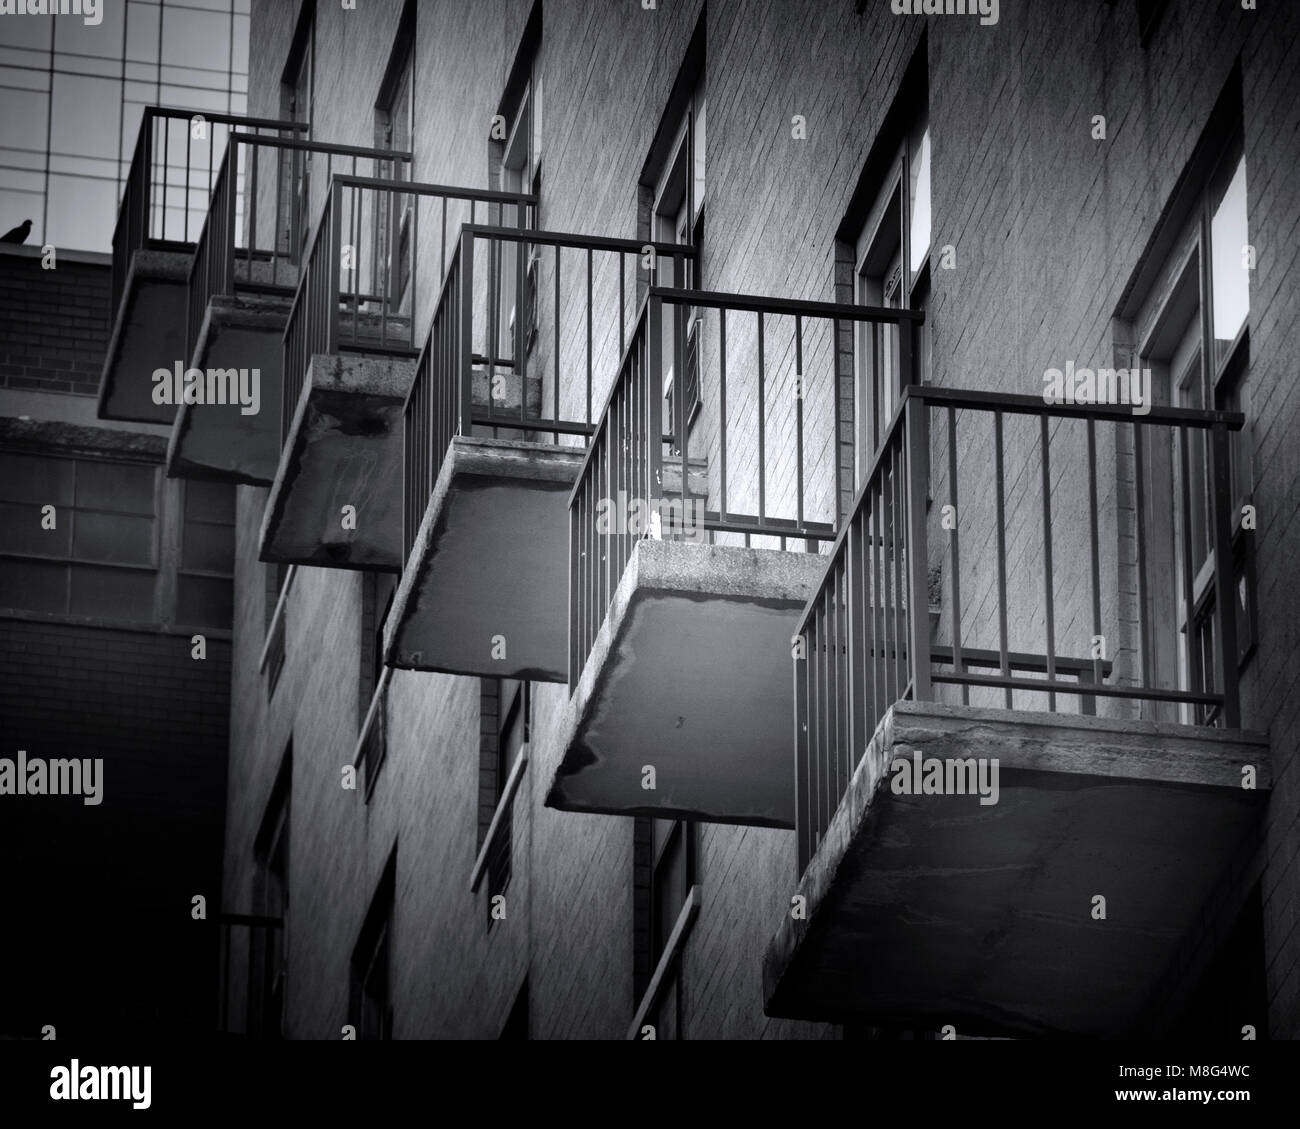 The balconies of a New York City apartment building create an interesting image when photographed from the street. Stock Photo